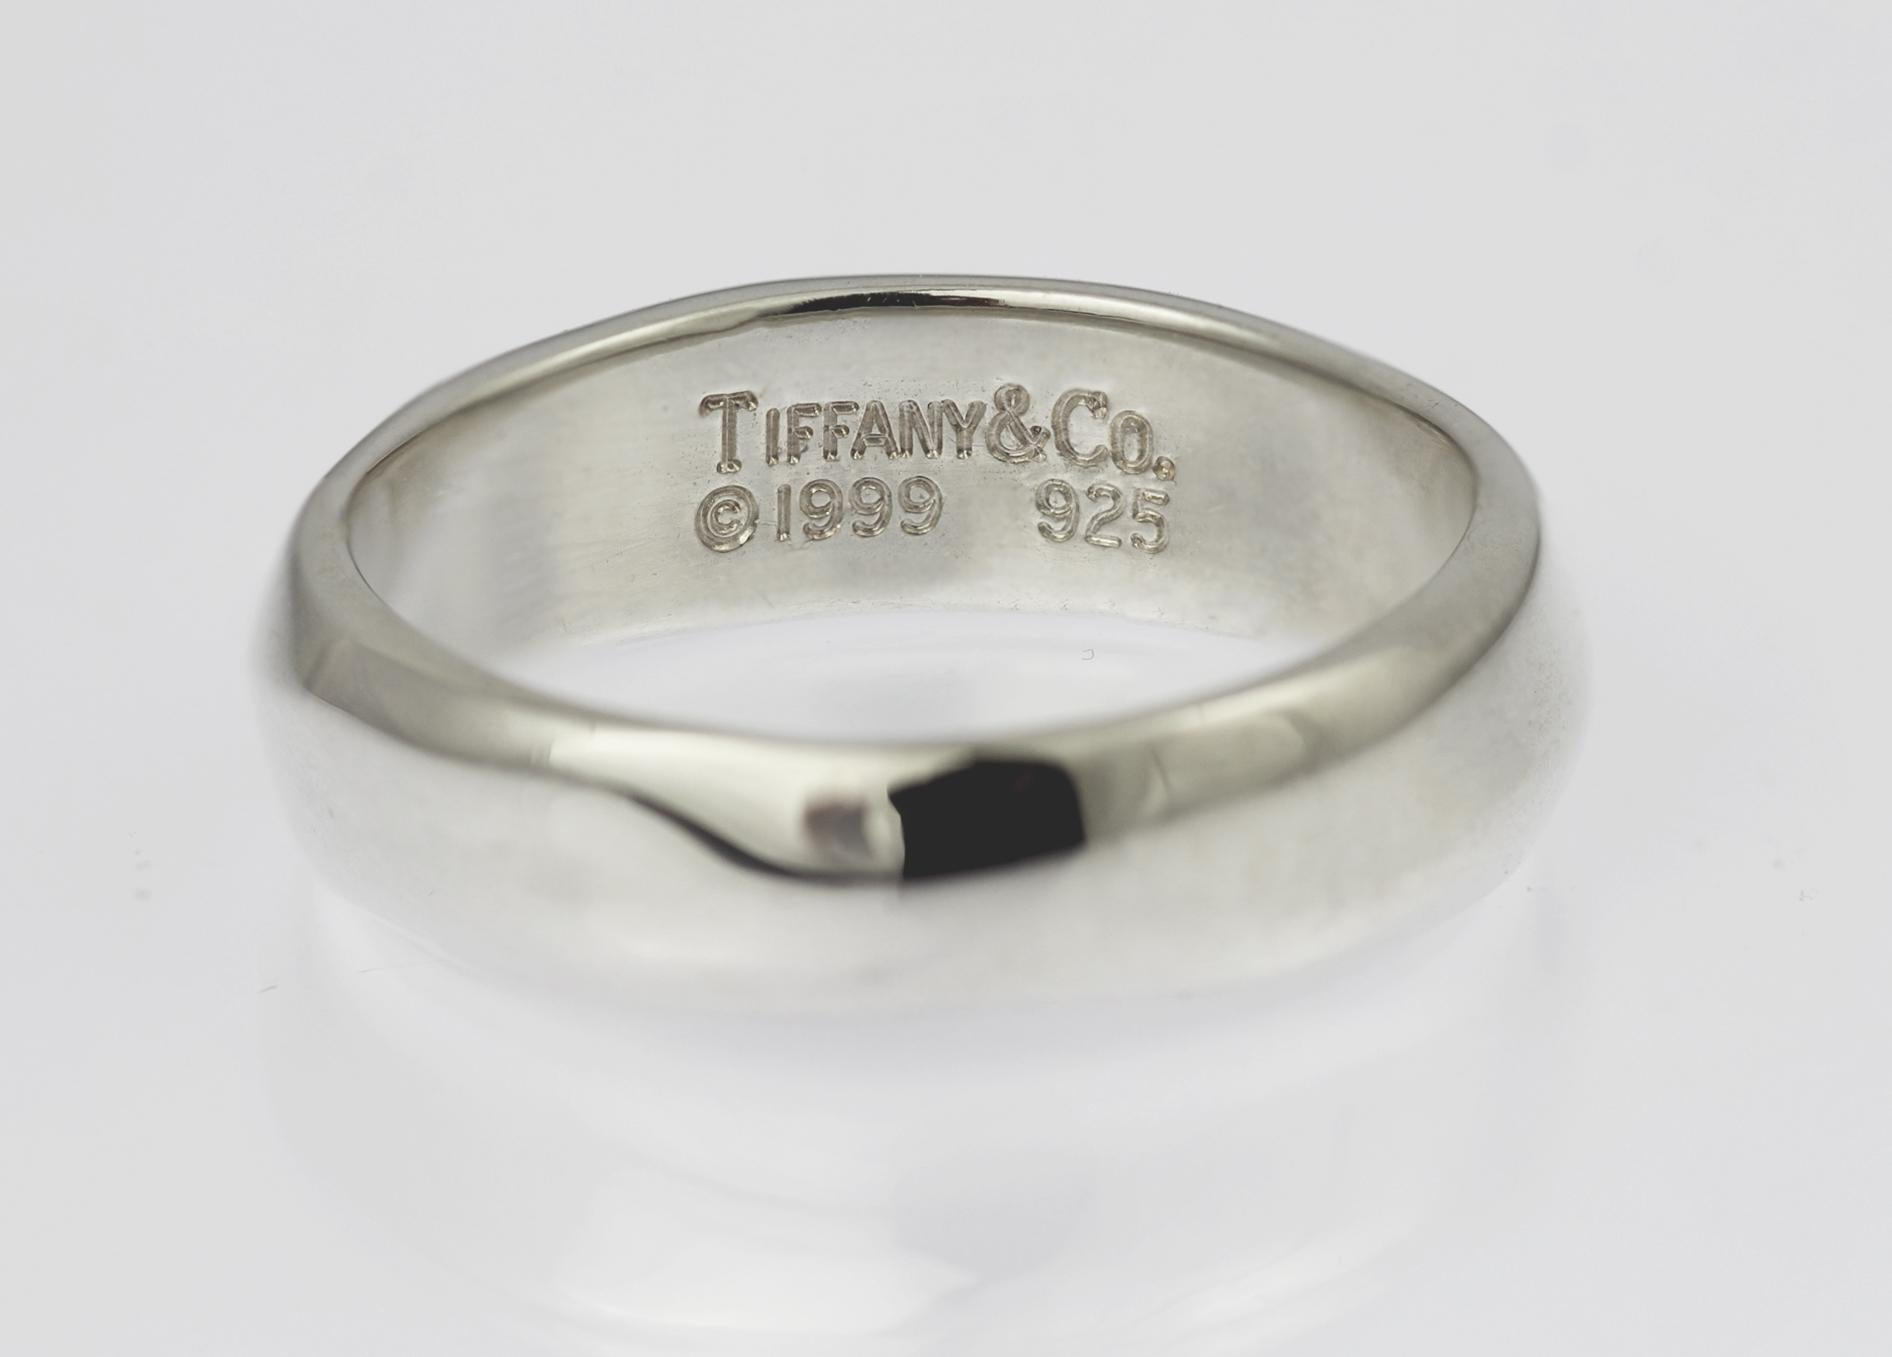 Highly polished and subtly contoured with a wave running along the length of a ring to a very slight dome, this Tiffany ring is stamped inside 'TIFFANY & CO  @1999  925'

The band width tapers finely from 5.6mm to 5.0mm and the thickness from 3.0mm